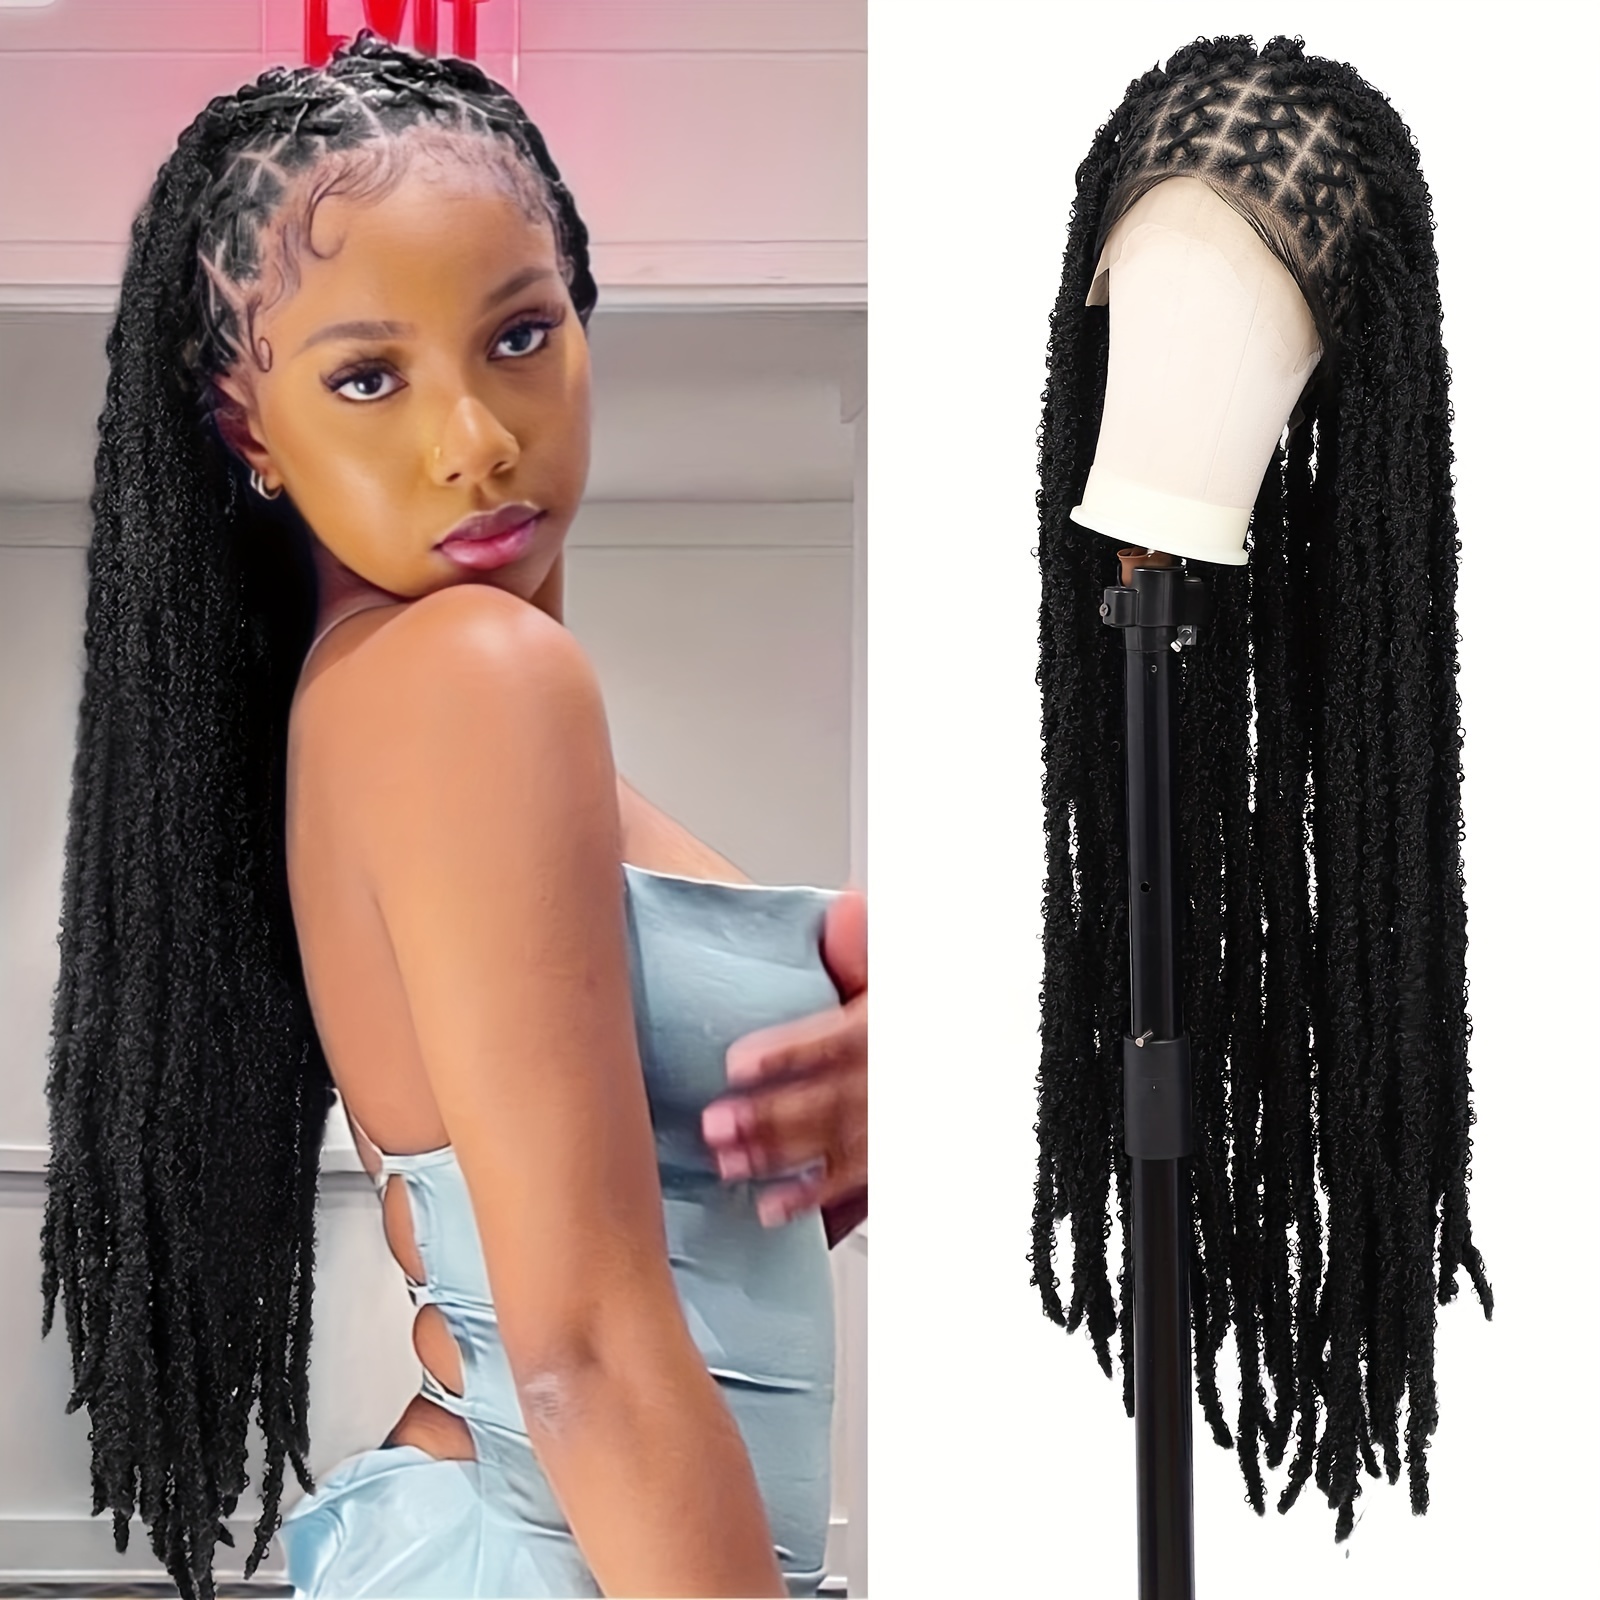 Criss Cross Knotless Box Braided Wigs with Baby Hair 36 Cornrow Lace Front  Braids Wigs for Women Embroidery Full Double Lace Burgundy Braid Wig